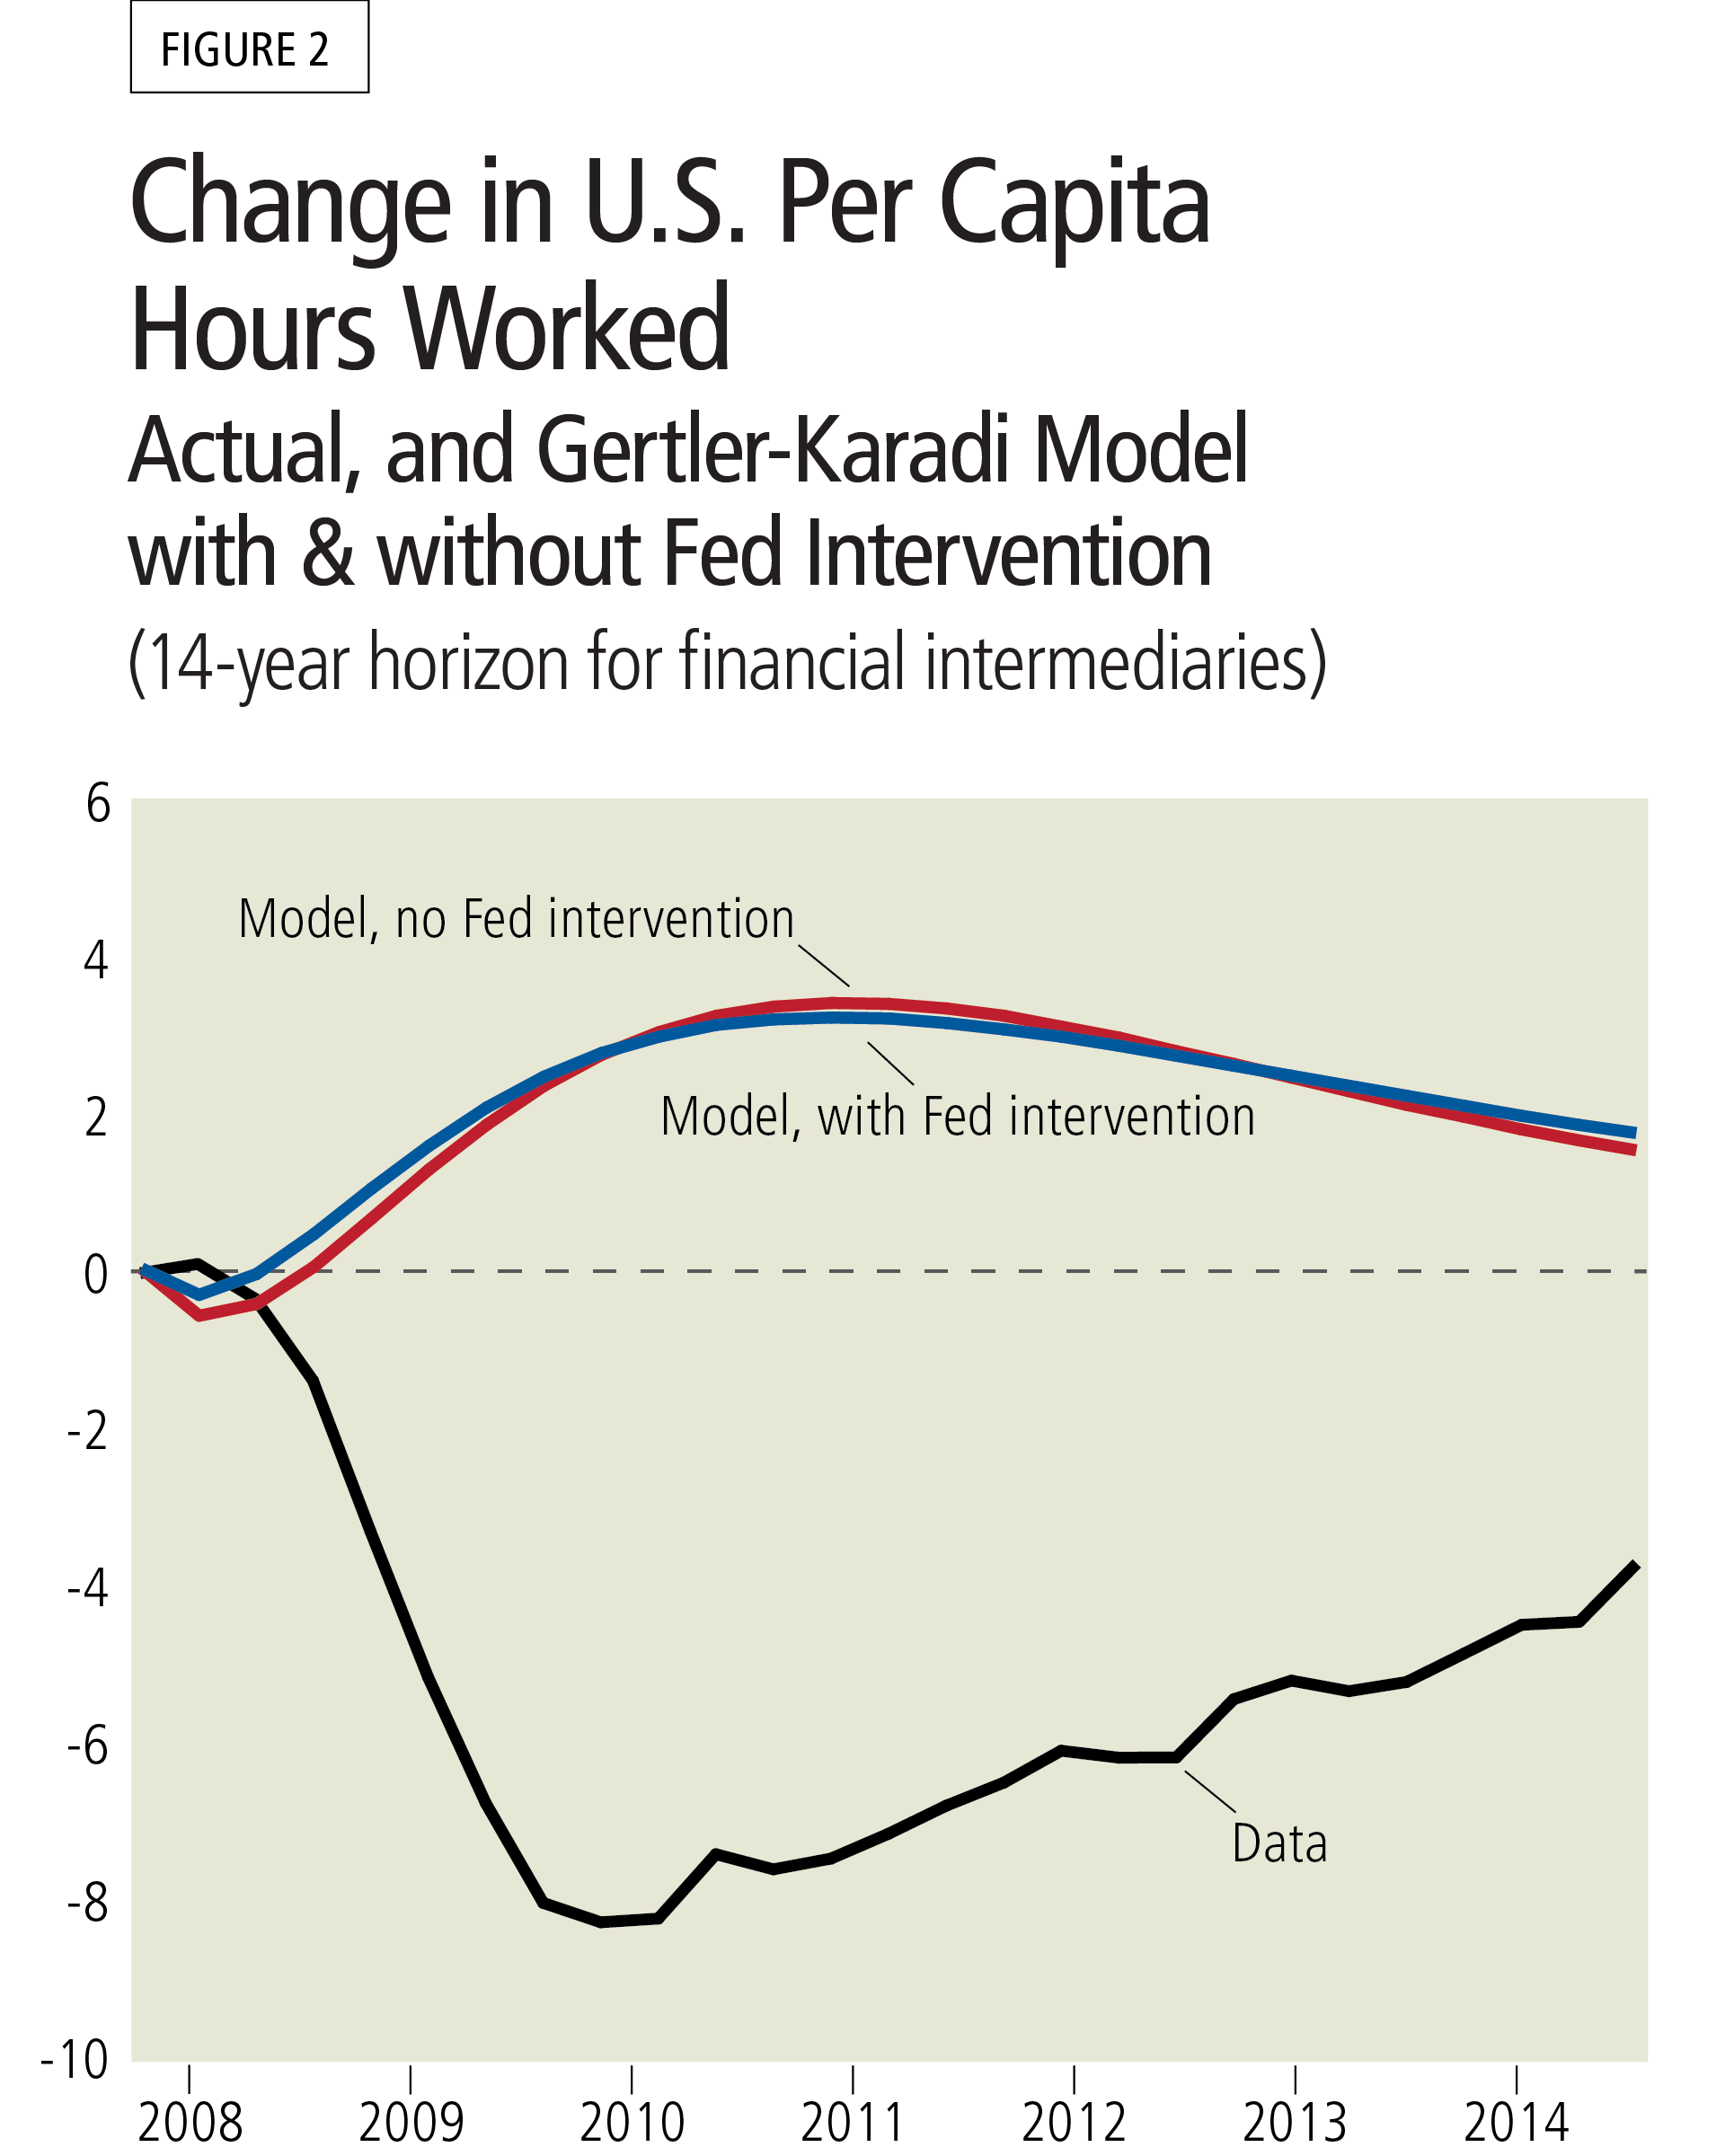 Figure 2: Change in U.S. Per Capita Hours Worked - Actual, and Gertler-Karadi Model with and without Fed Intervention (14-year horizon for financial intermediaries)